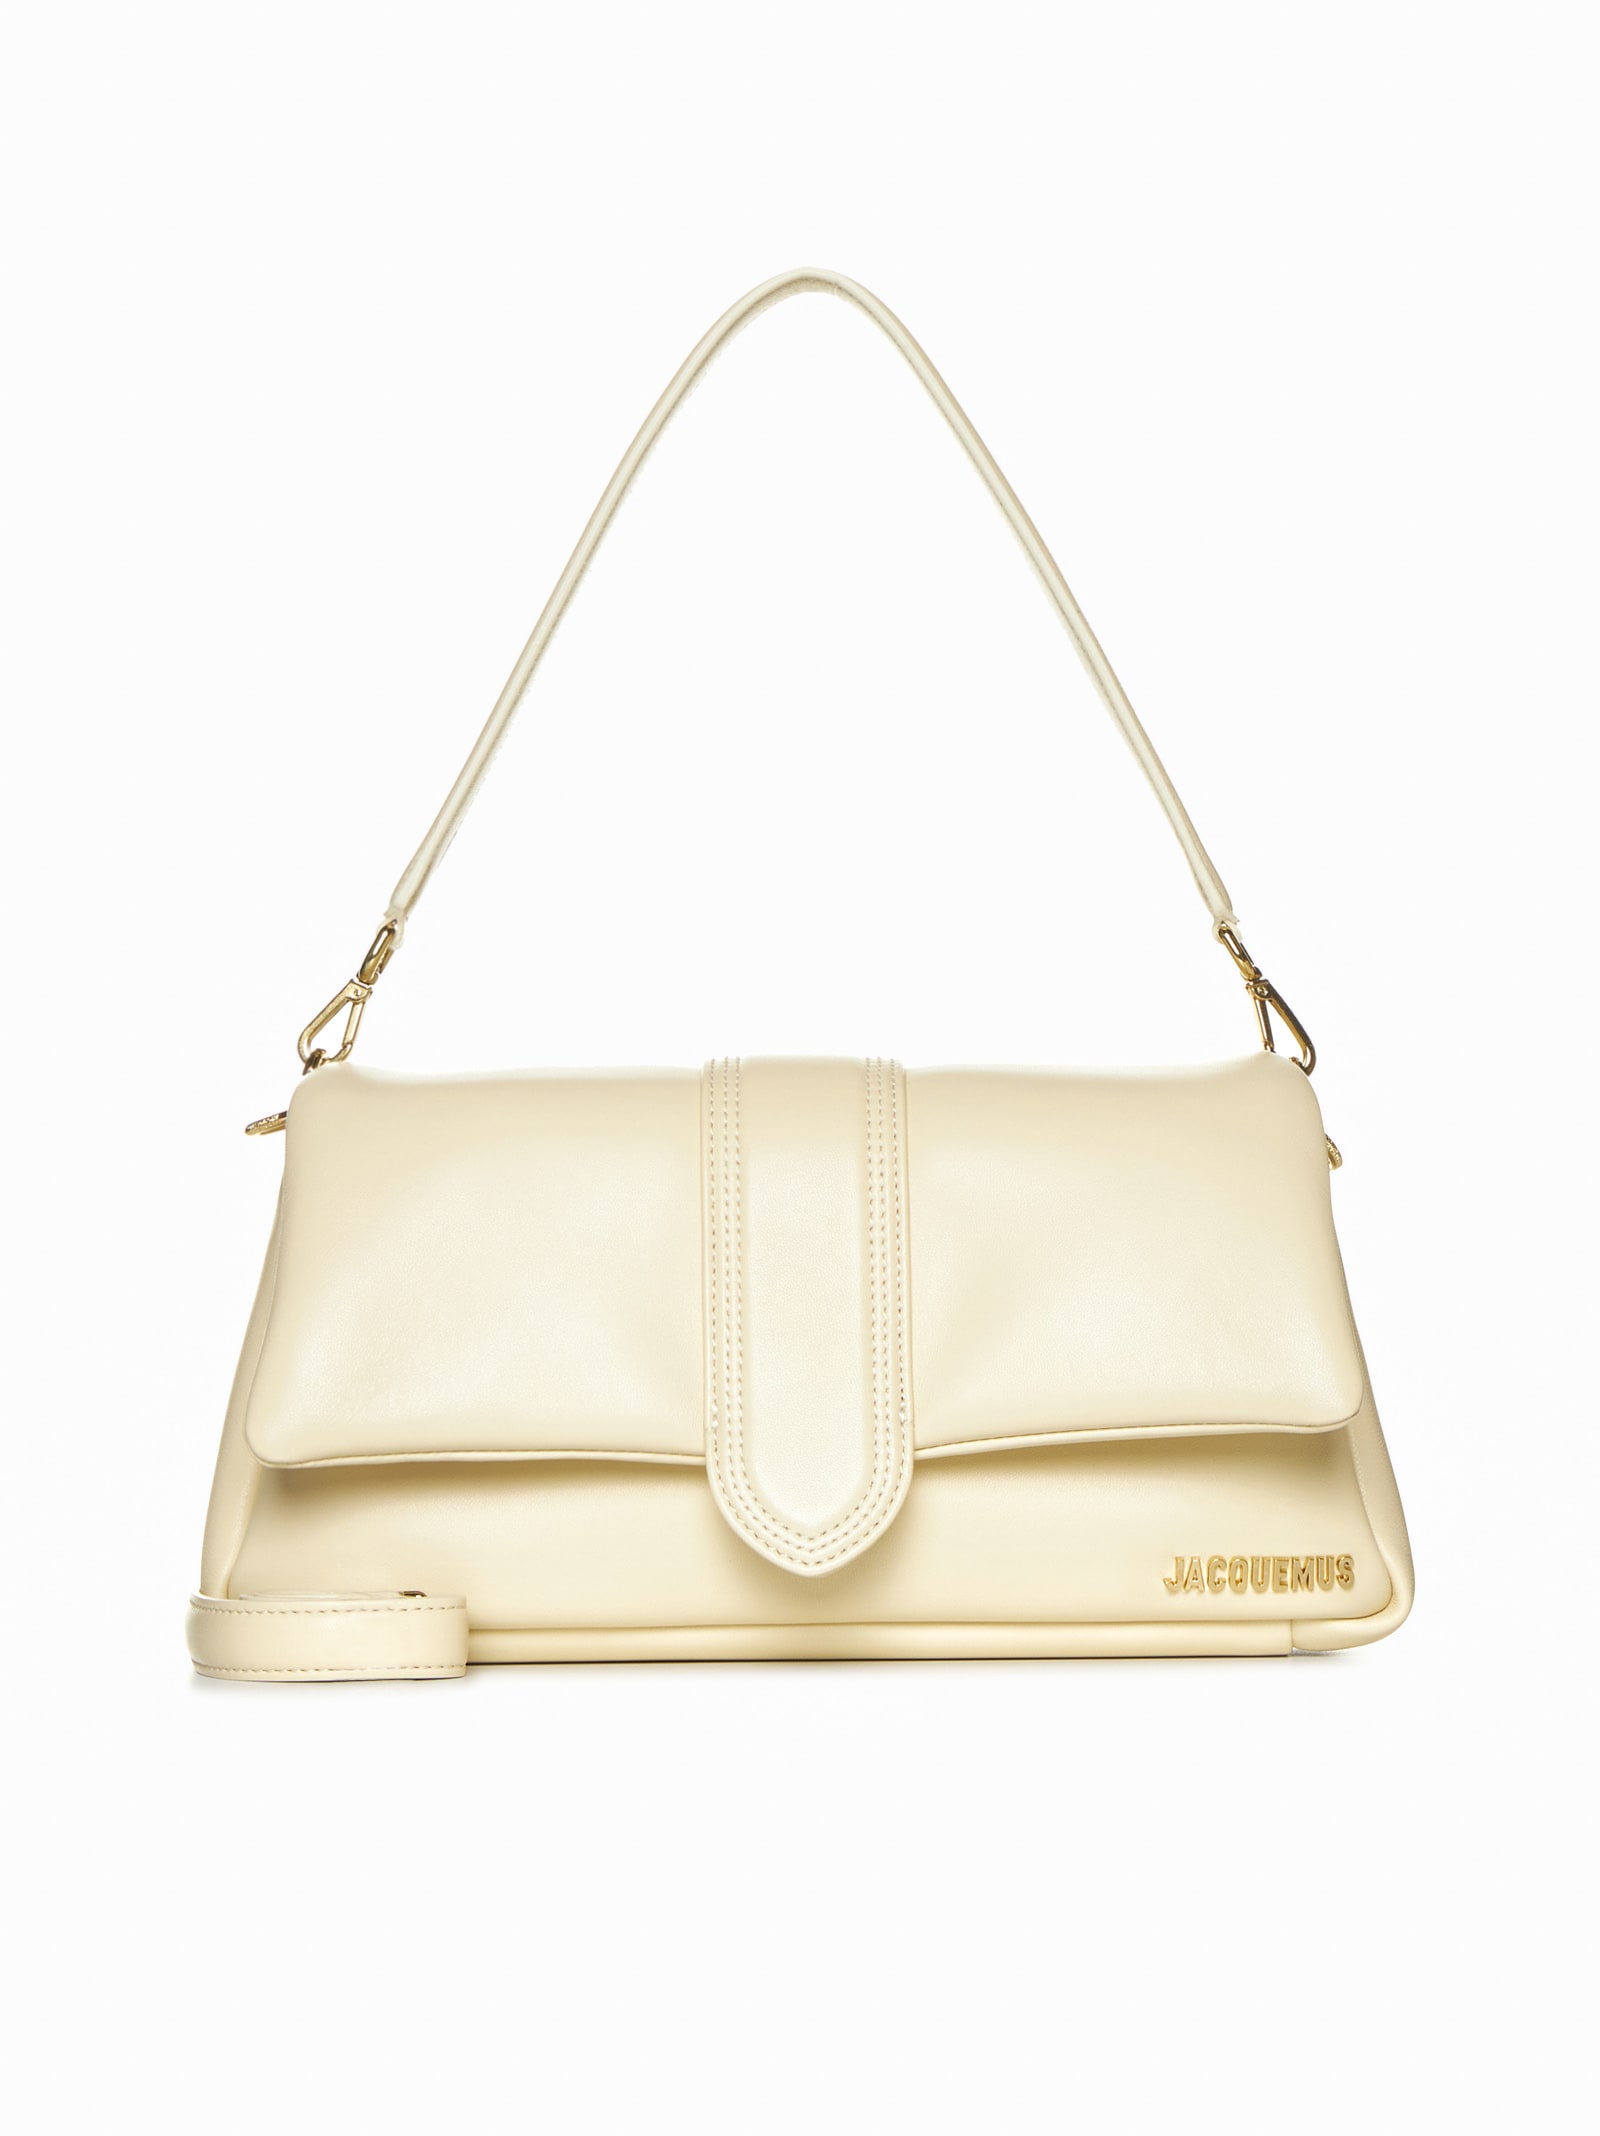 Jacquemus Tote In Ivory